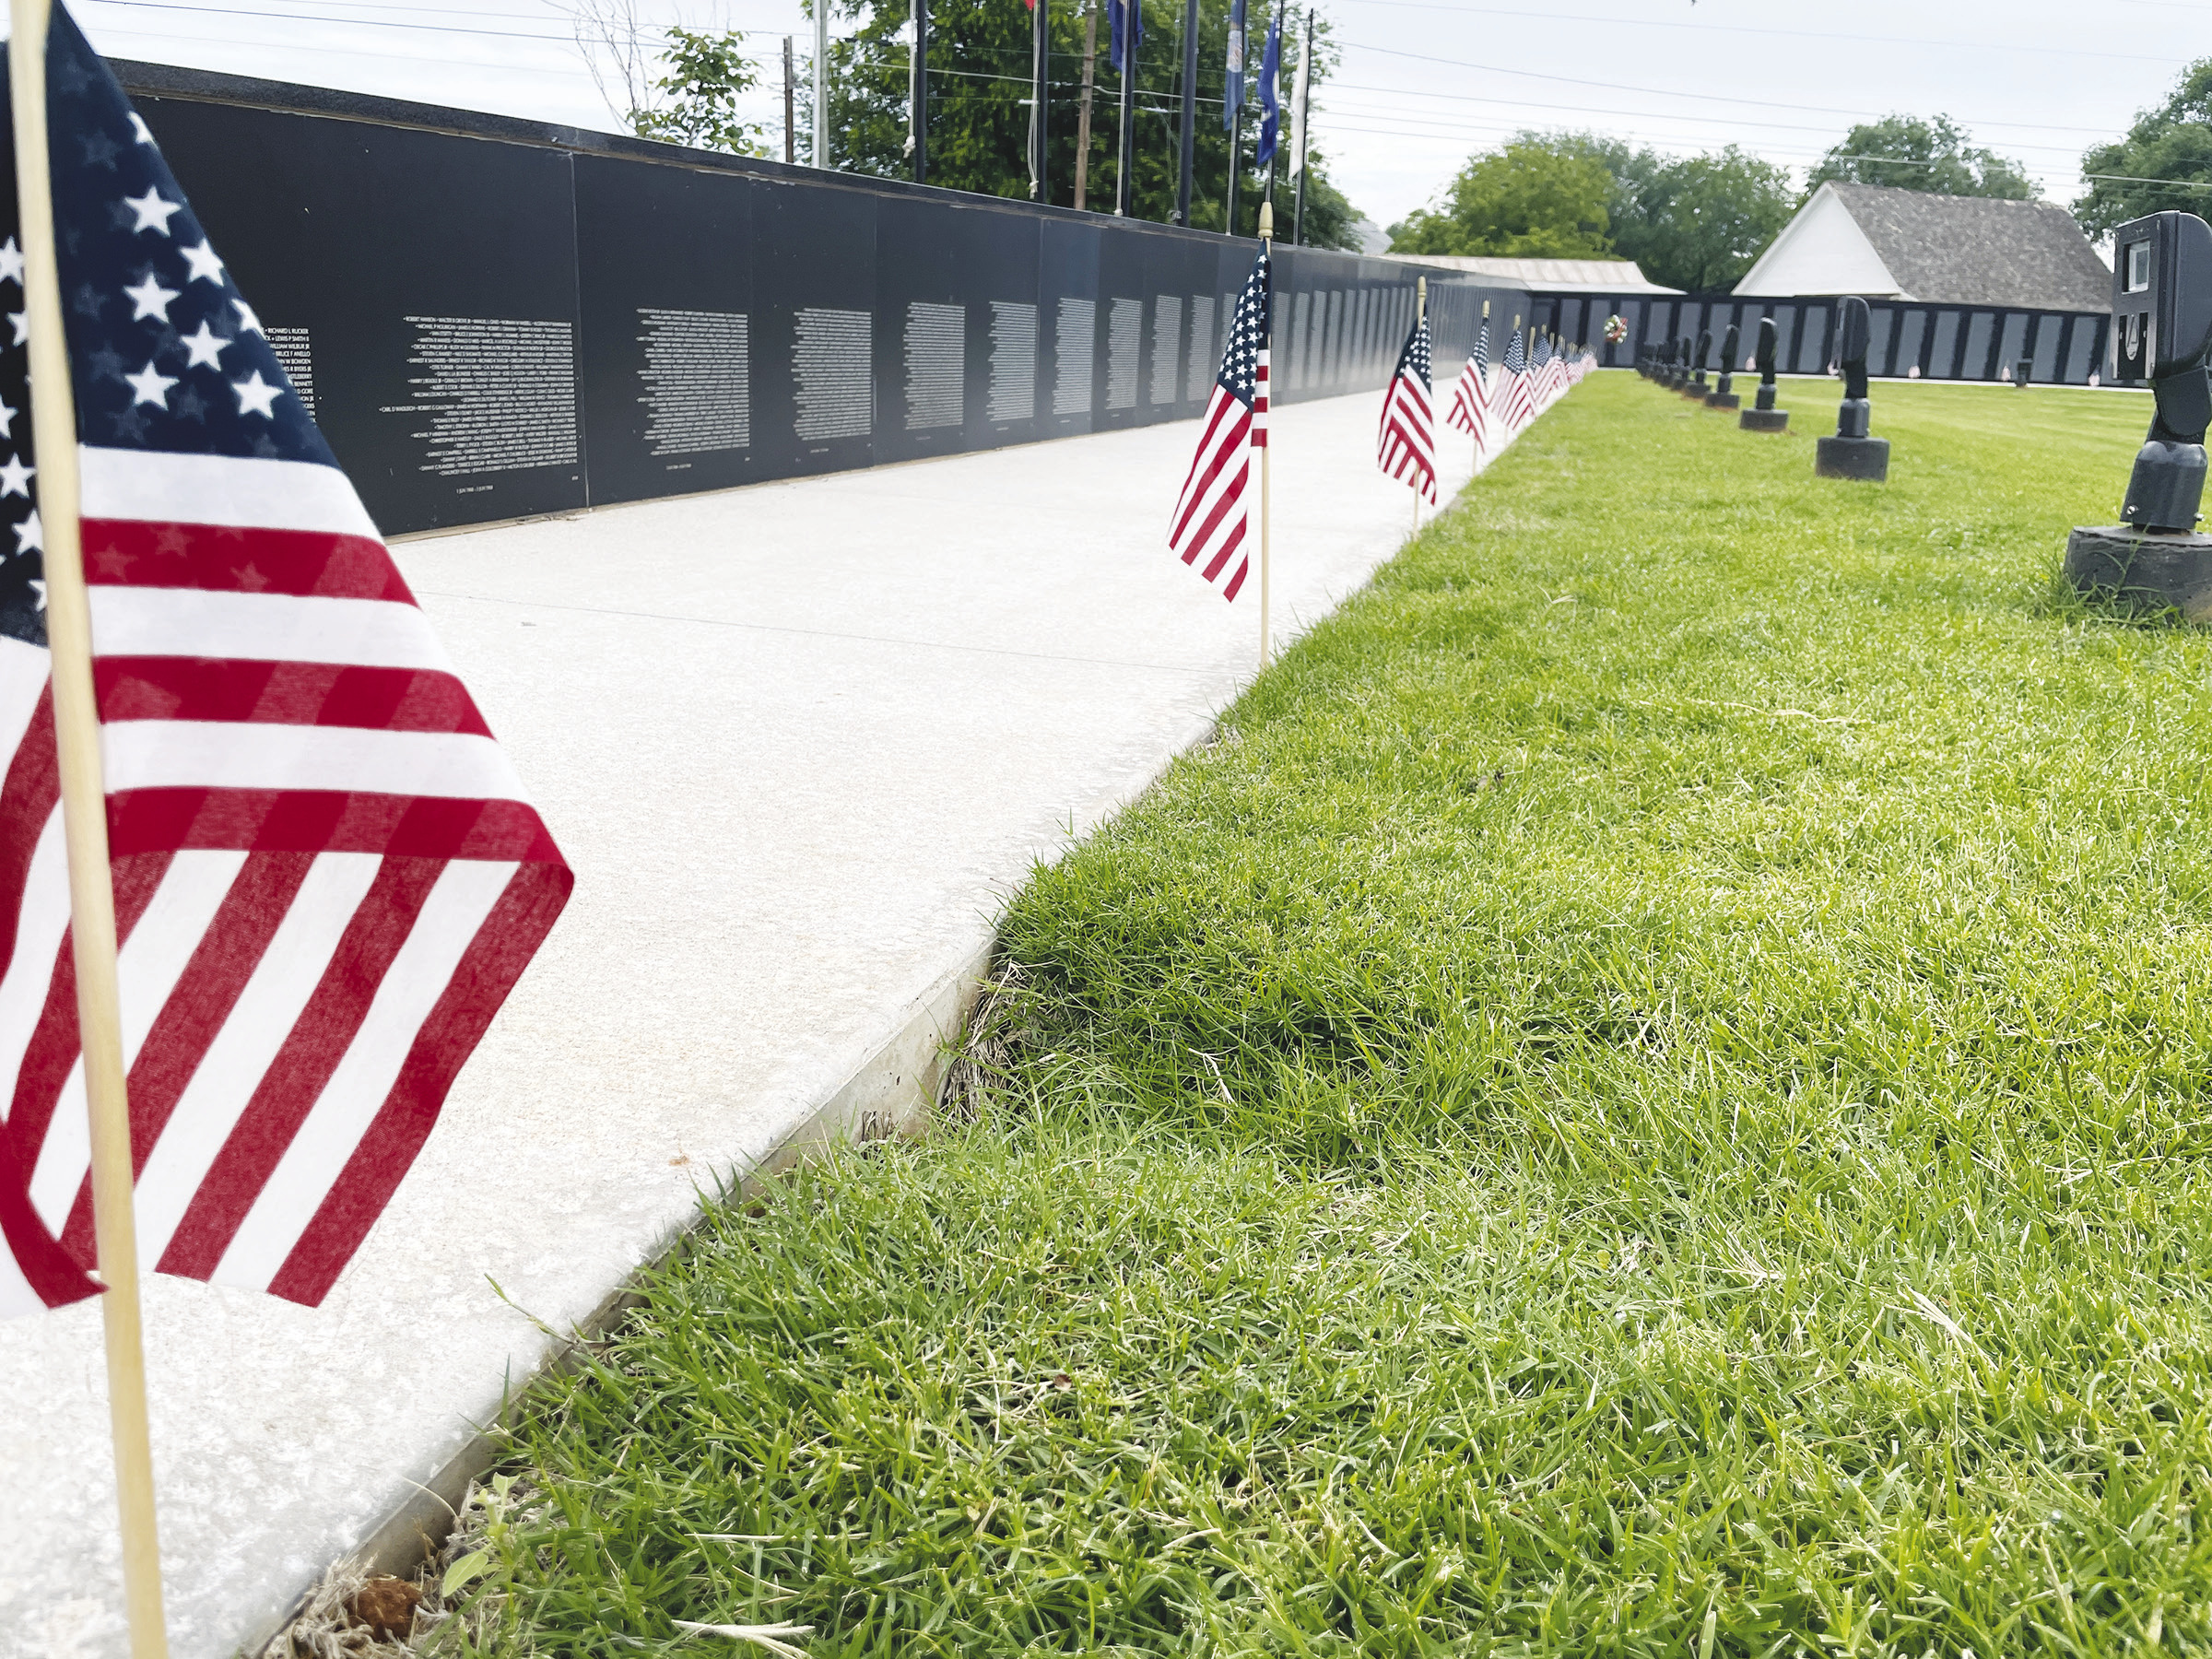 ◄ Flags were placed along the Vietnam Veterans Memorial Wall to commemorate fallen soldiers for Memorial Day. Montgomery Malone/WDN